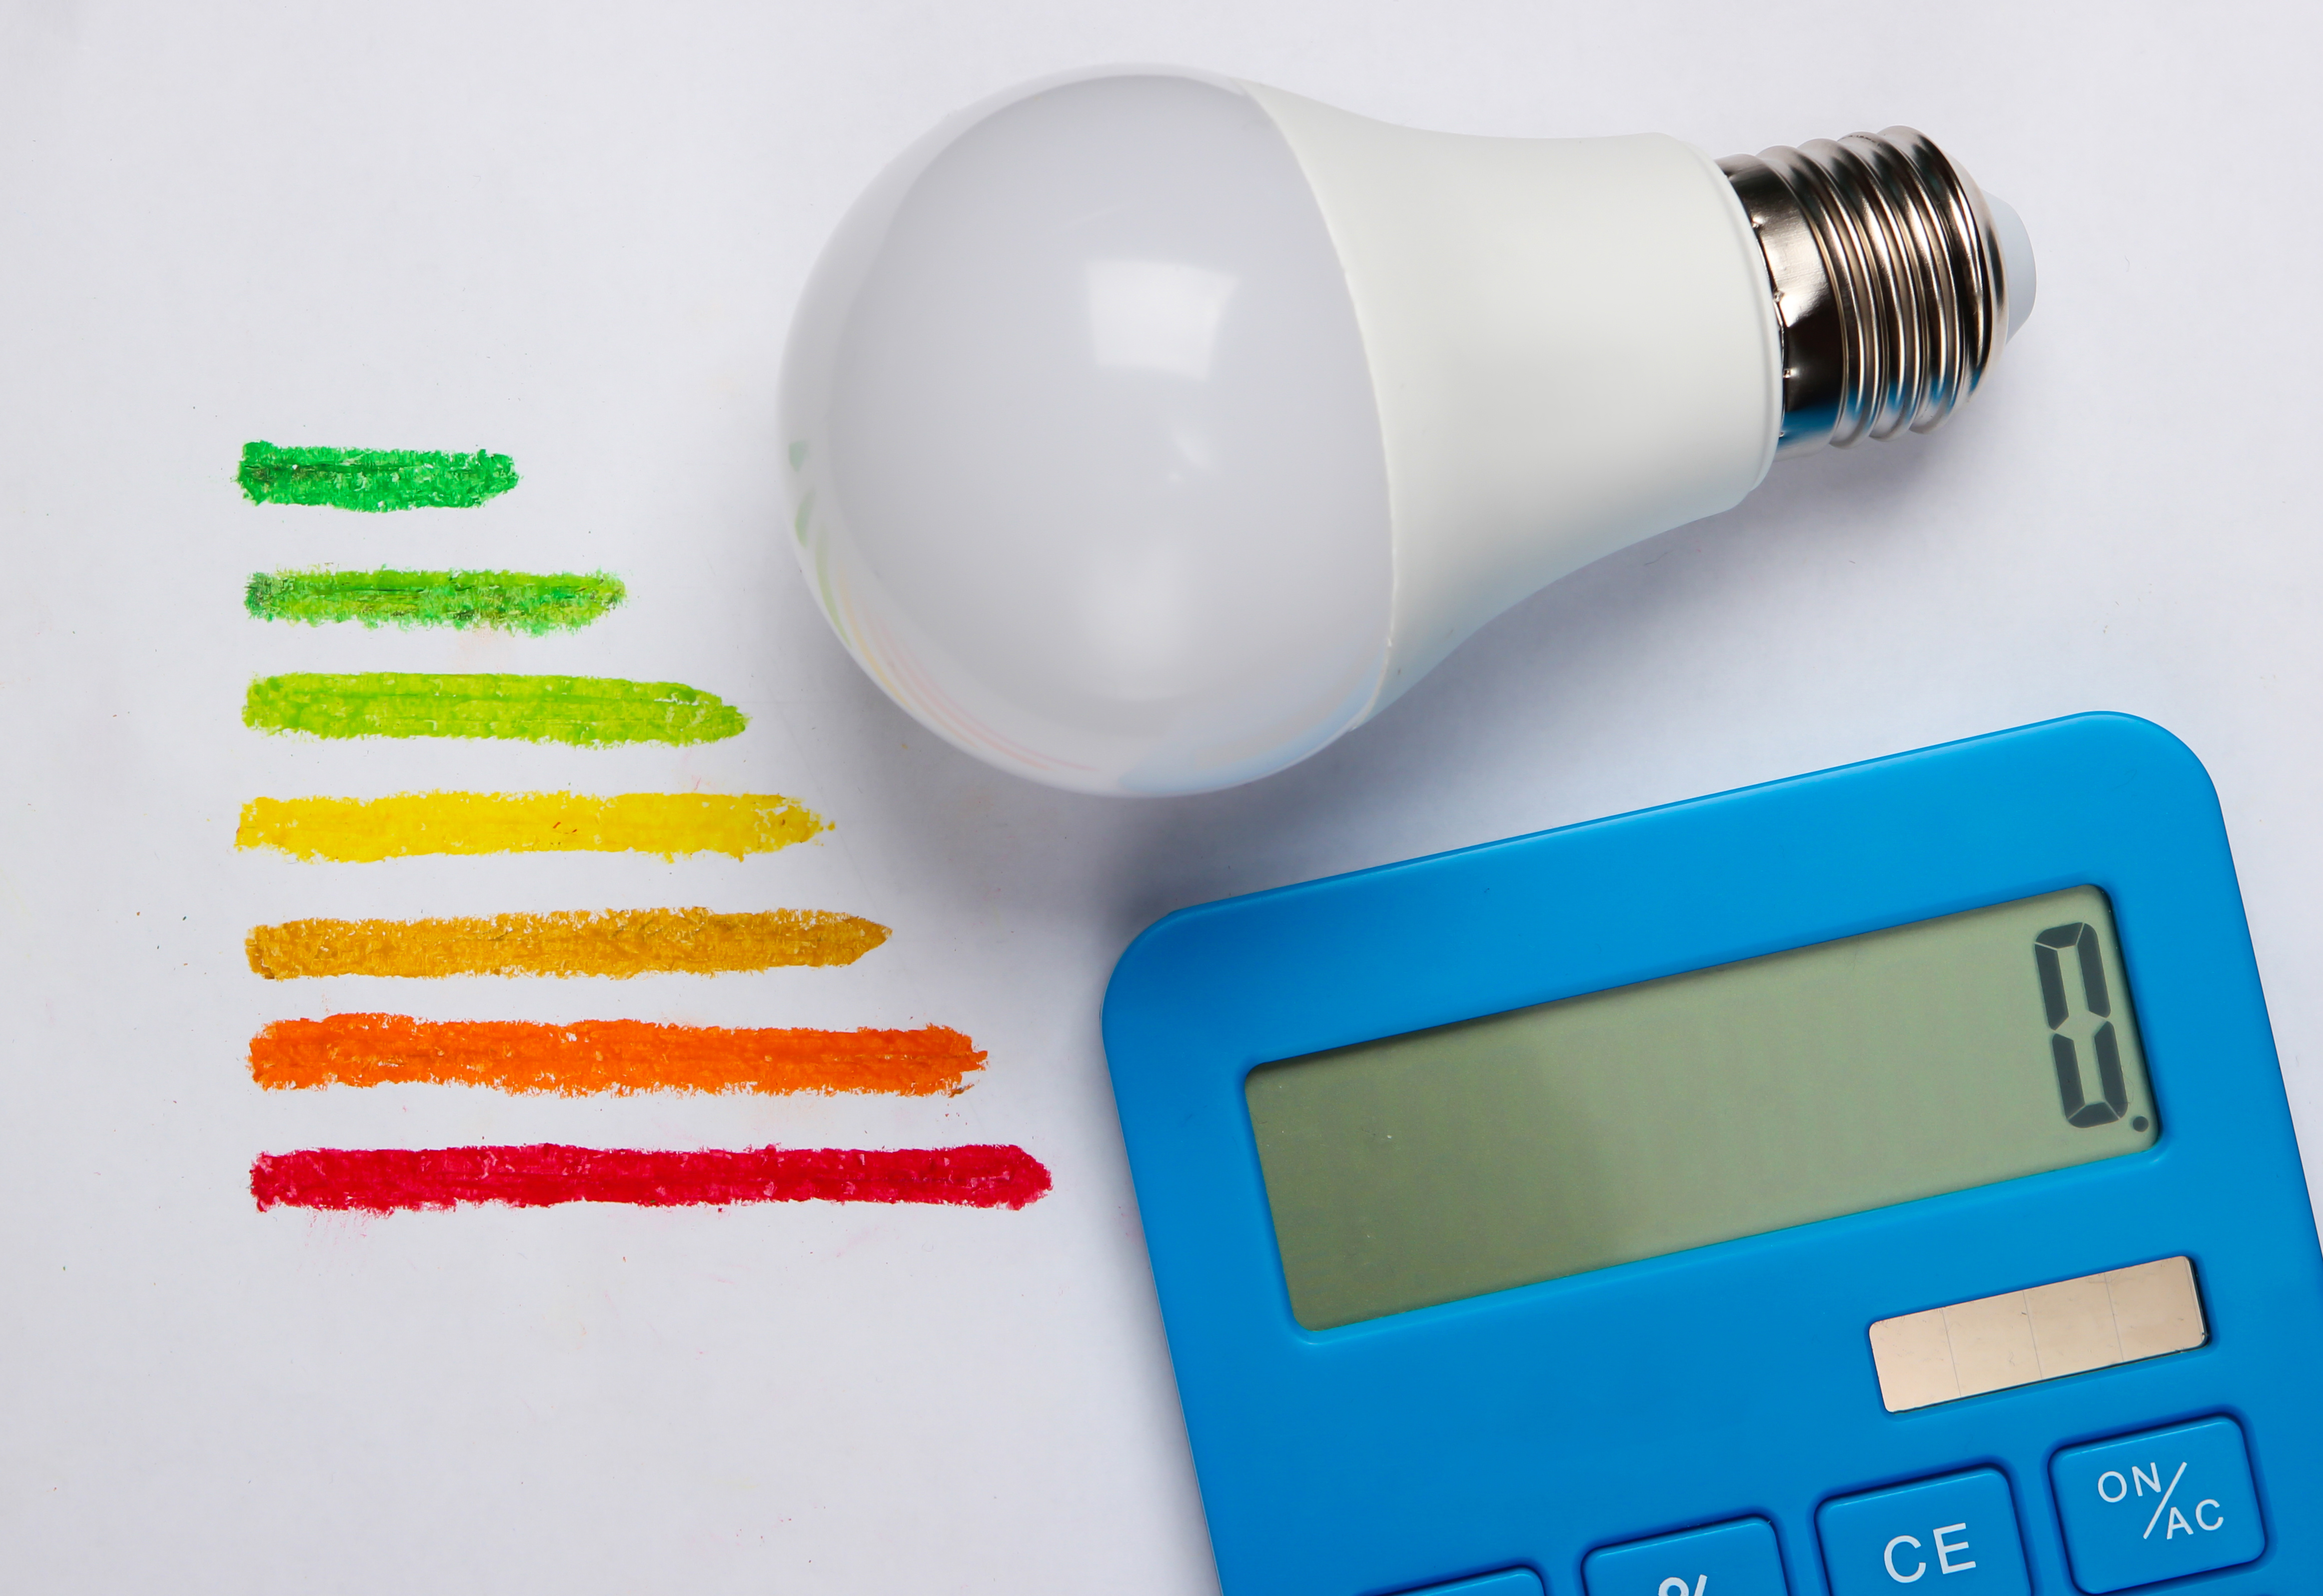 A light bulb and a calculator next to hand-drawn energy efficiency rating lines.